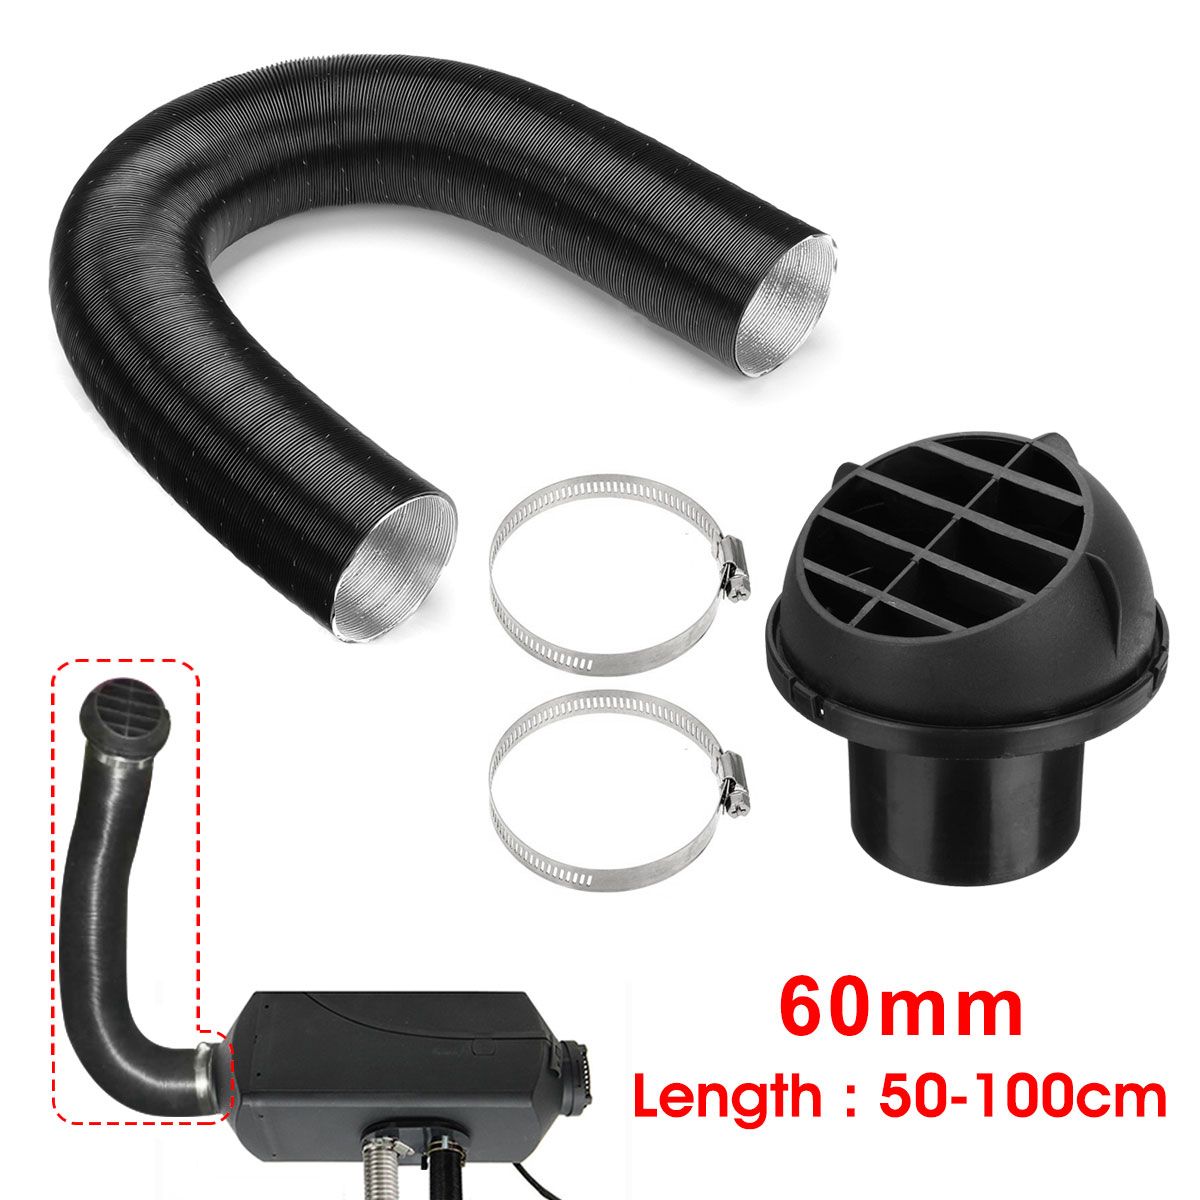 60mm-Heater-Duct-Pipe-Air-Outlet-Vent-Hose-Clip-For-Eberspacher-Diesel-Heater-1722474